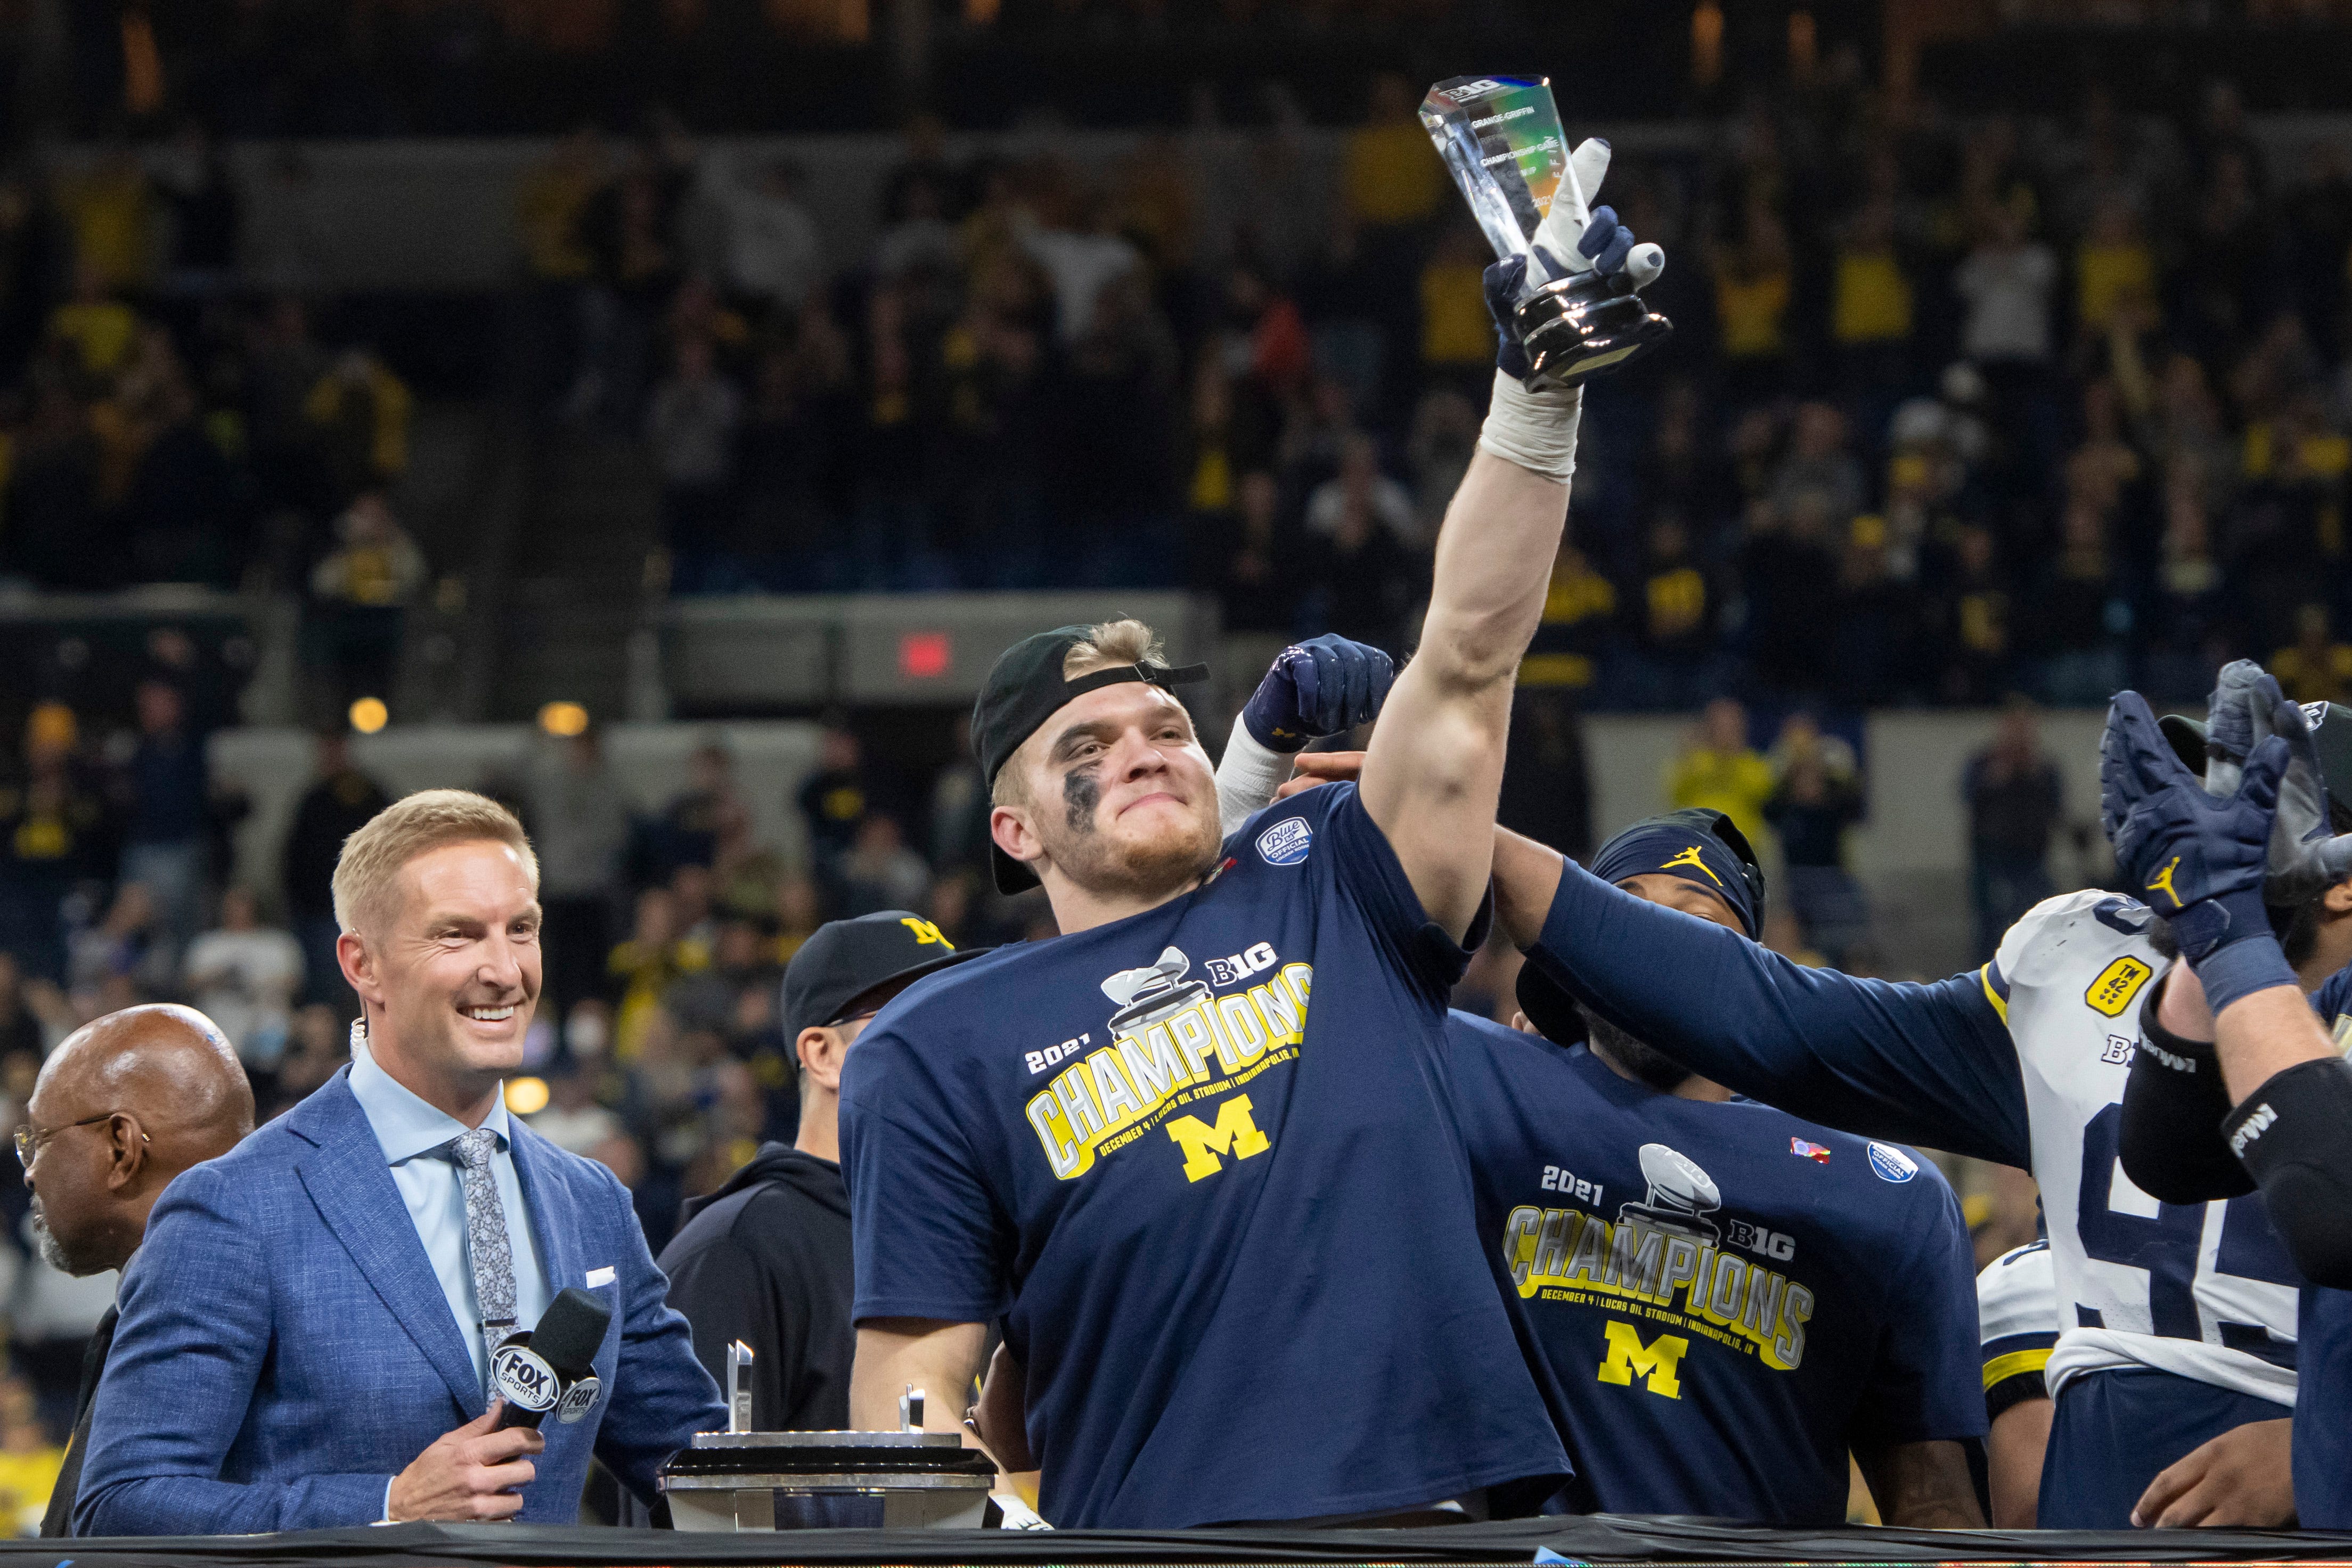 Michigan defensive end Aidan Hutchinson holds up the game MVP trophy after the University of Michigan defeated the University of Iowa 42-3 to win the Big Ten championship.